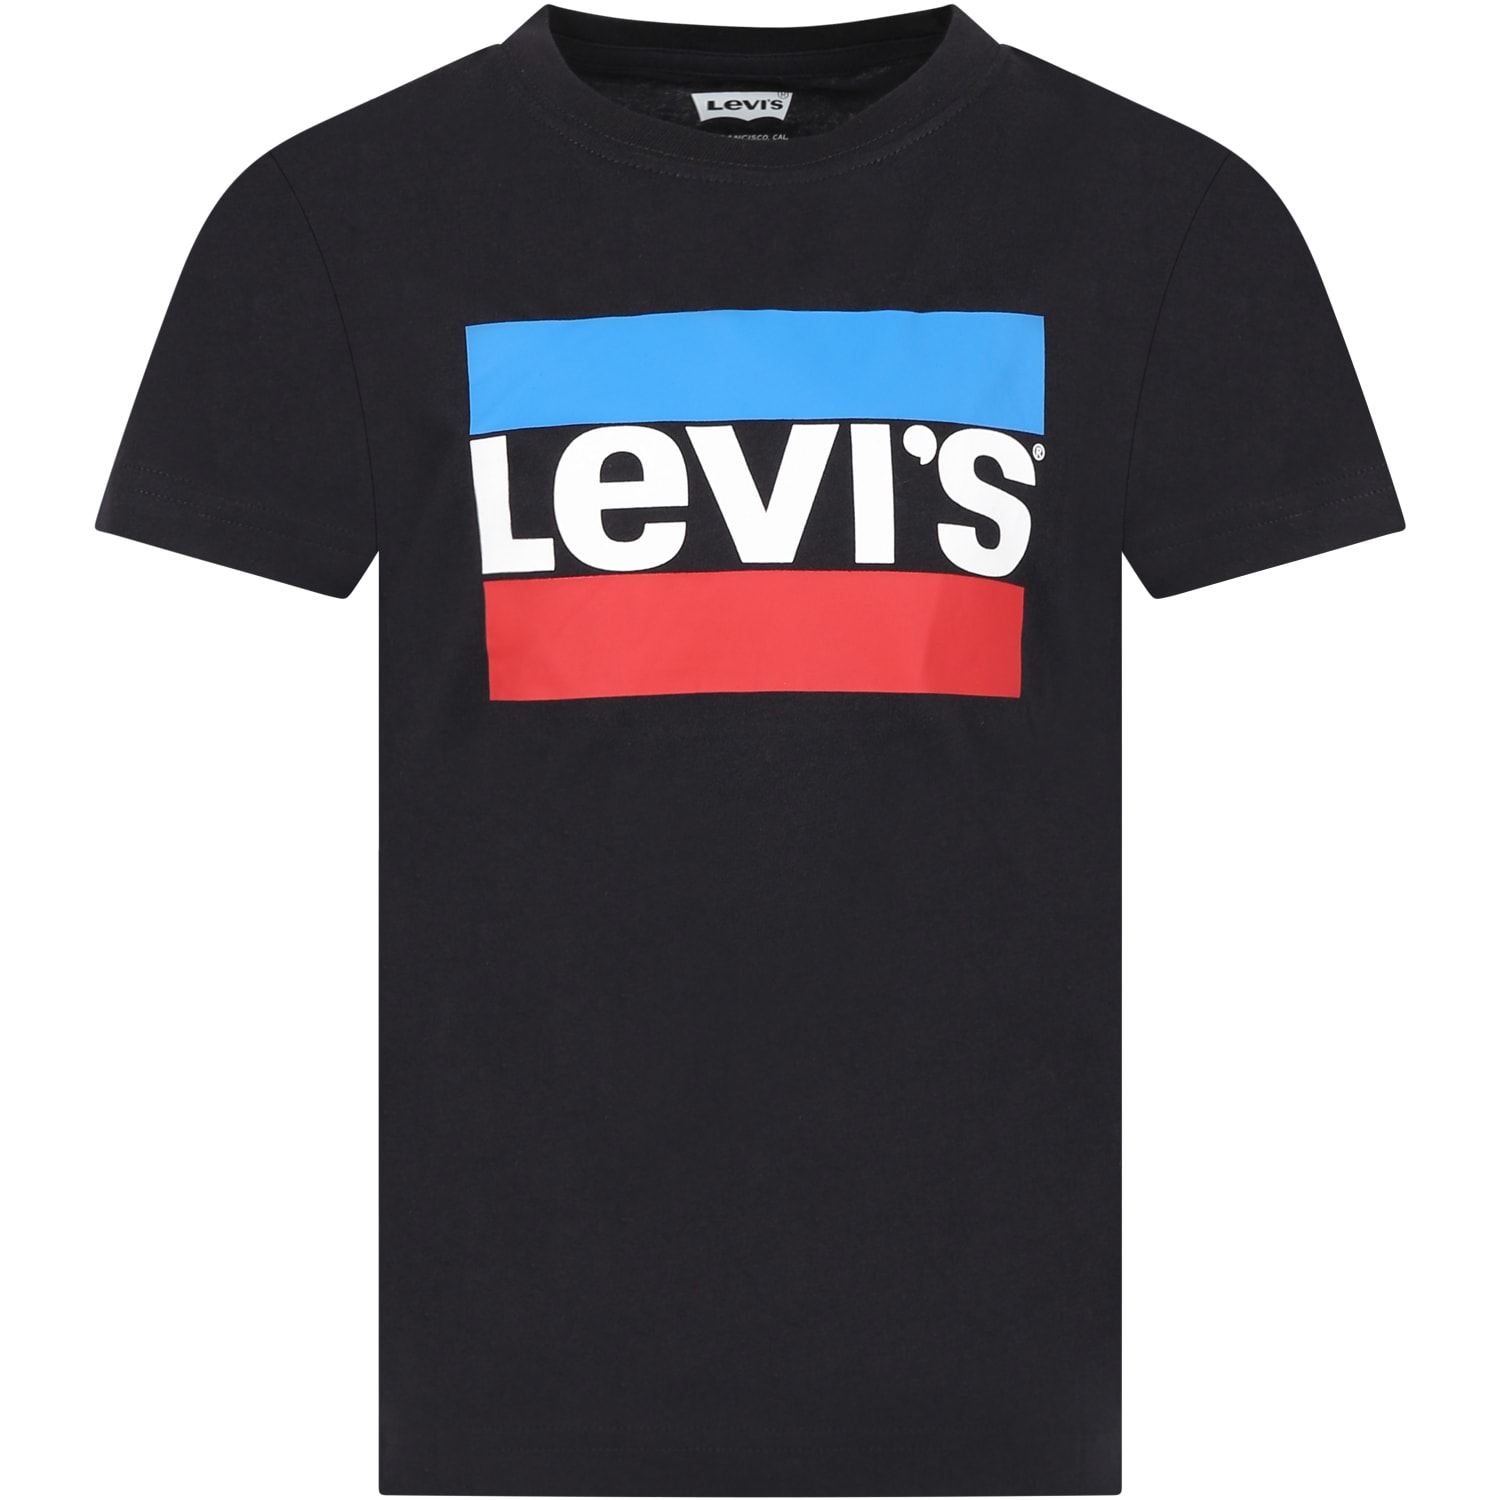 Levi's Kids' Black T-shirt For Boy With Logo